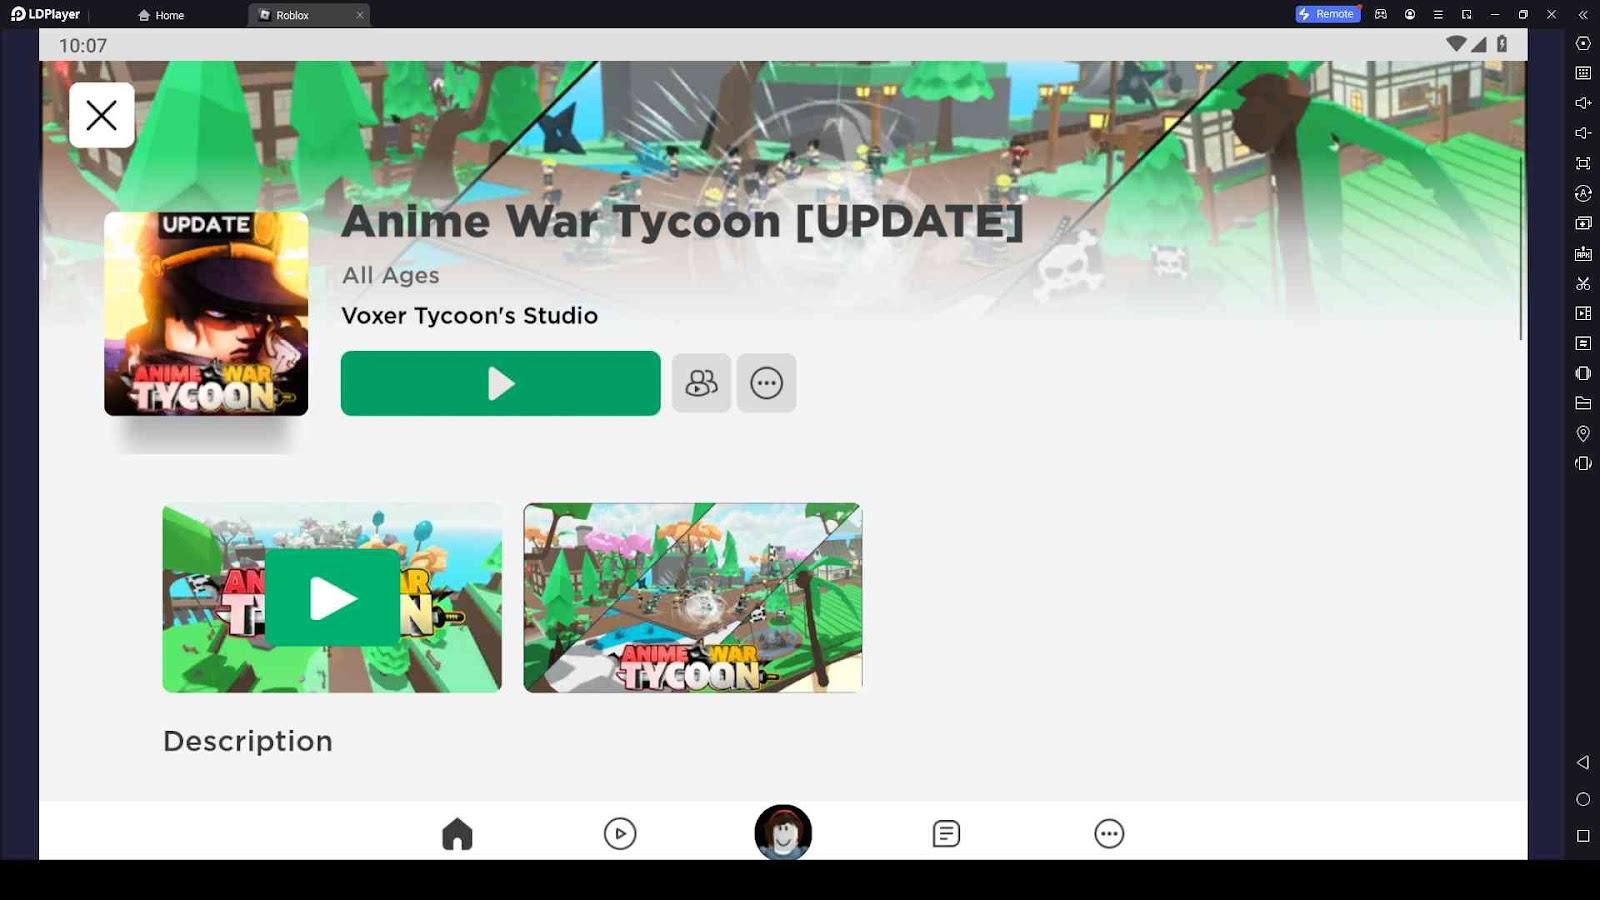 NEW* ALL WORKING CODES FOR War Tycoon IN AUGUST 2023! ROBLOX War Tycoon  CODES 